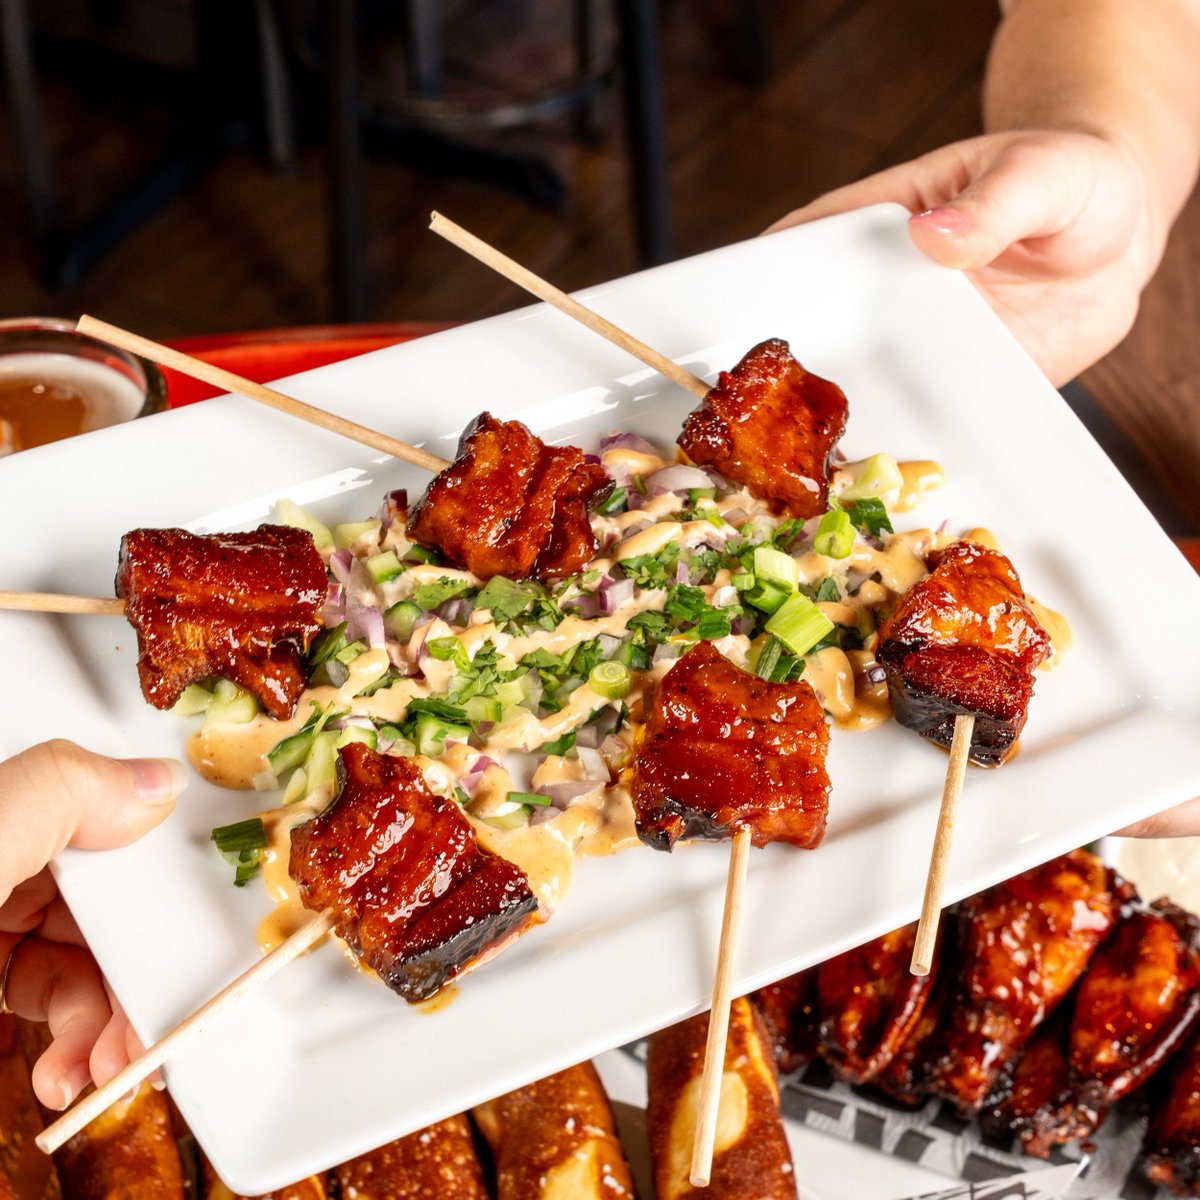 Order the Korean Pork Belly Pops for you and your friends. WARNING: there may be a fight over who gets the last one! #MastersofMeat #PorkBelly #BBQ #Meats #Foodie